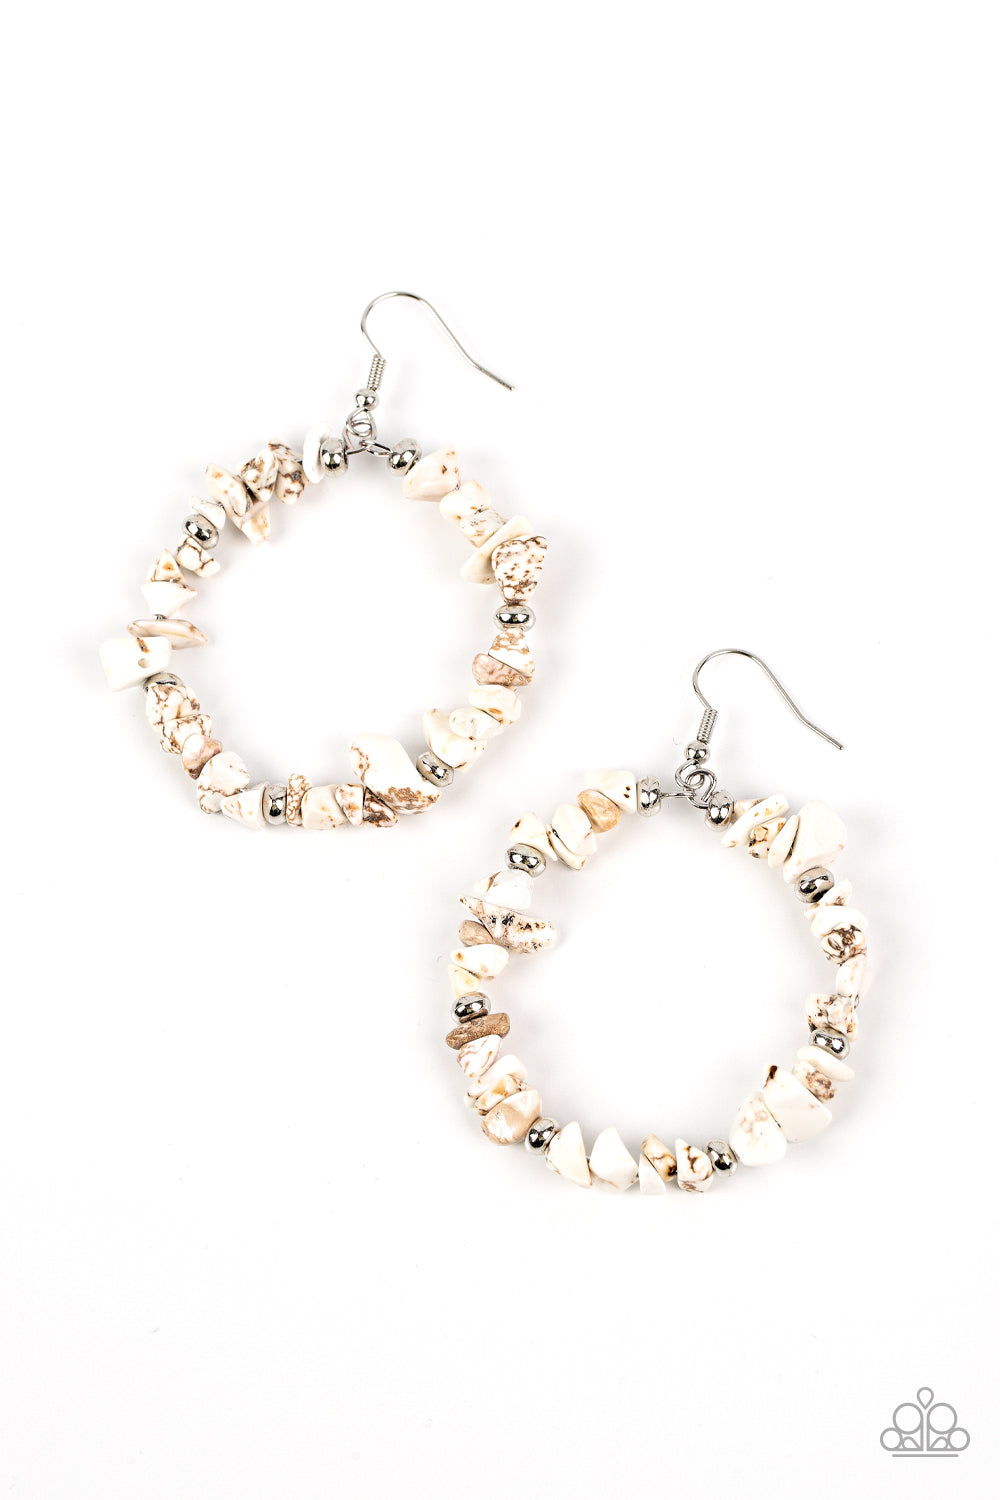 Mineral Mantra - White Stone and Silver Earrings - Paparazzi Accessories - Infused with dainty silver beaded accents, pieces of white stone are threaded along a wire hoop for an artisan inspired vibe. Earring attaches to a standard fishhook fitting.